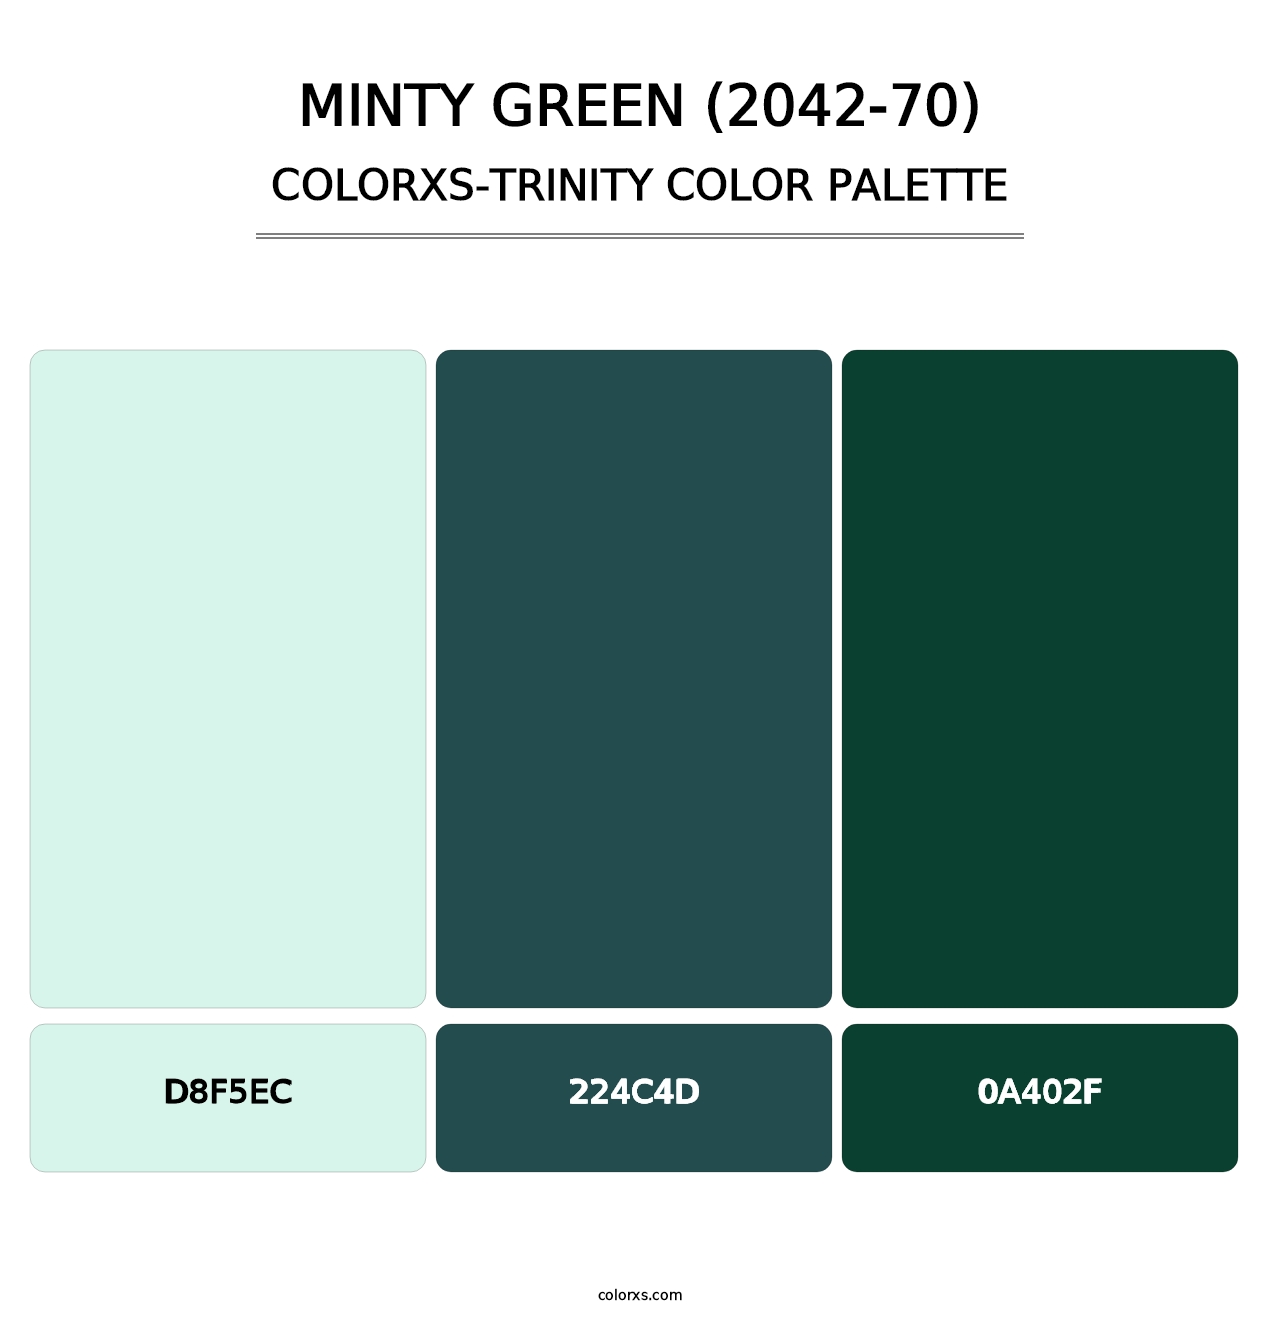 Minty Green (2042-70) - Colorxs Trinity Palette